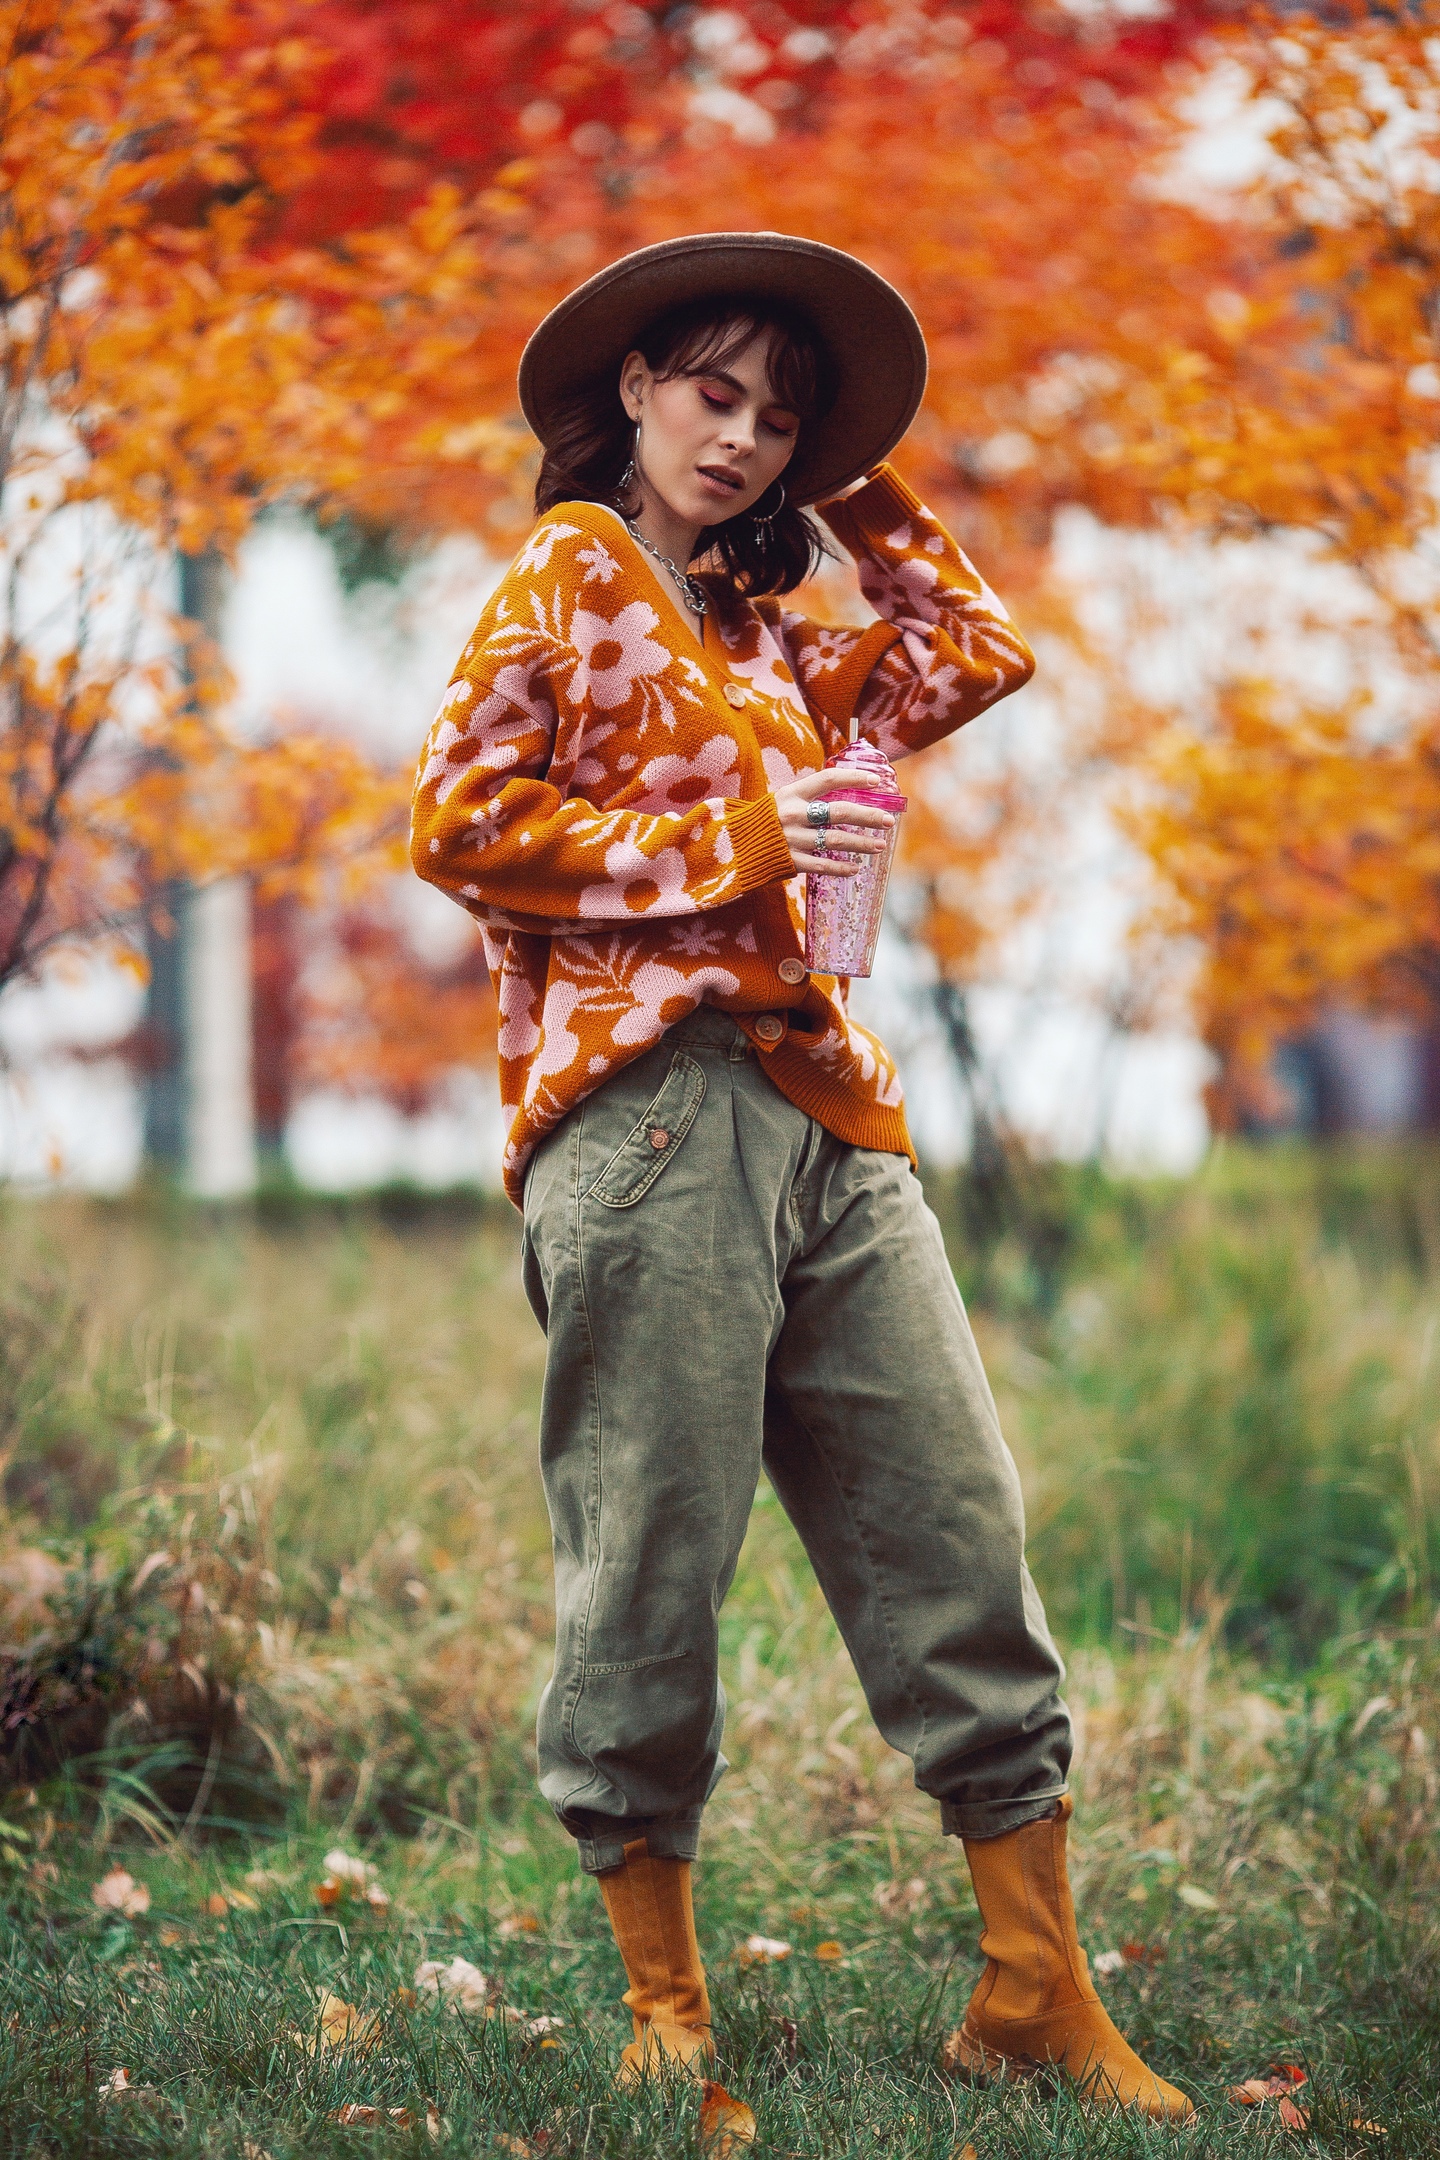 Woman in hat photoshoot in Autumn